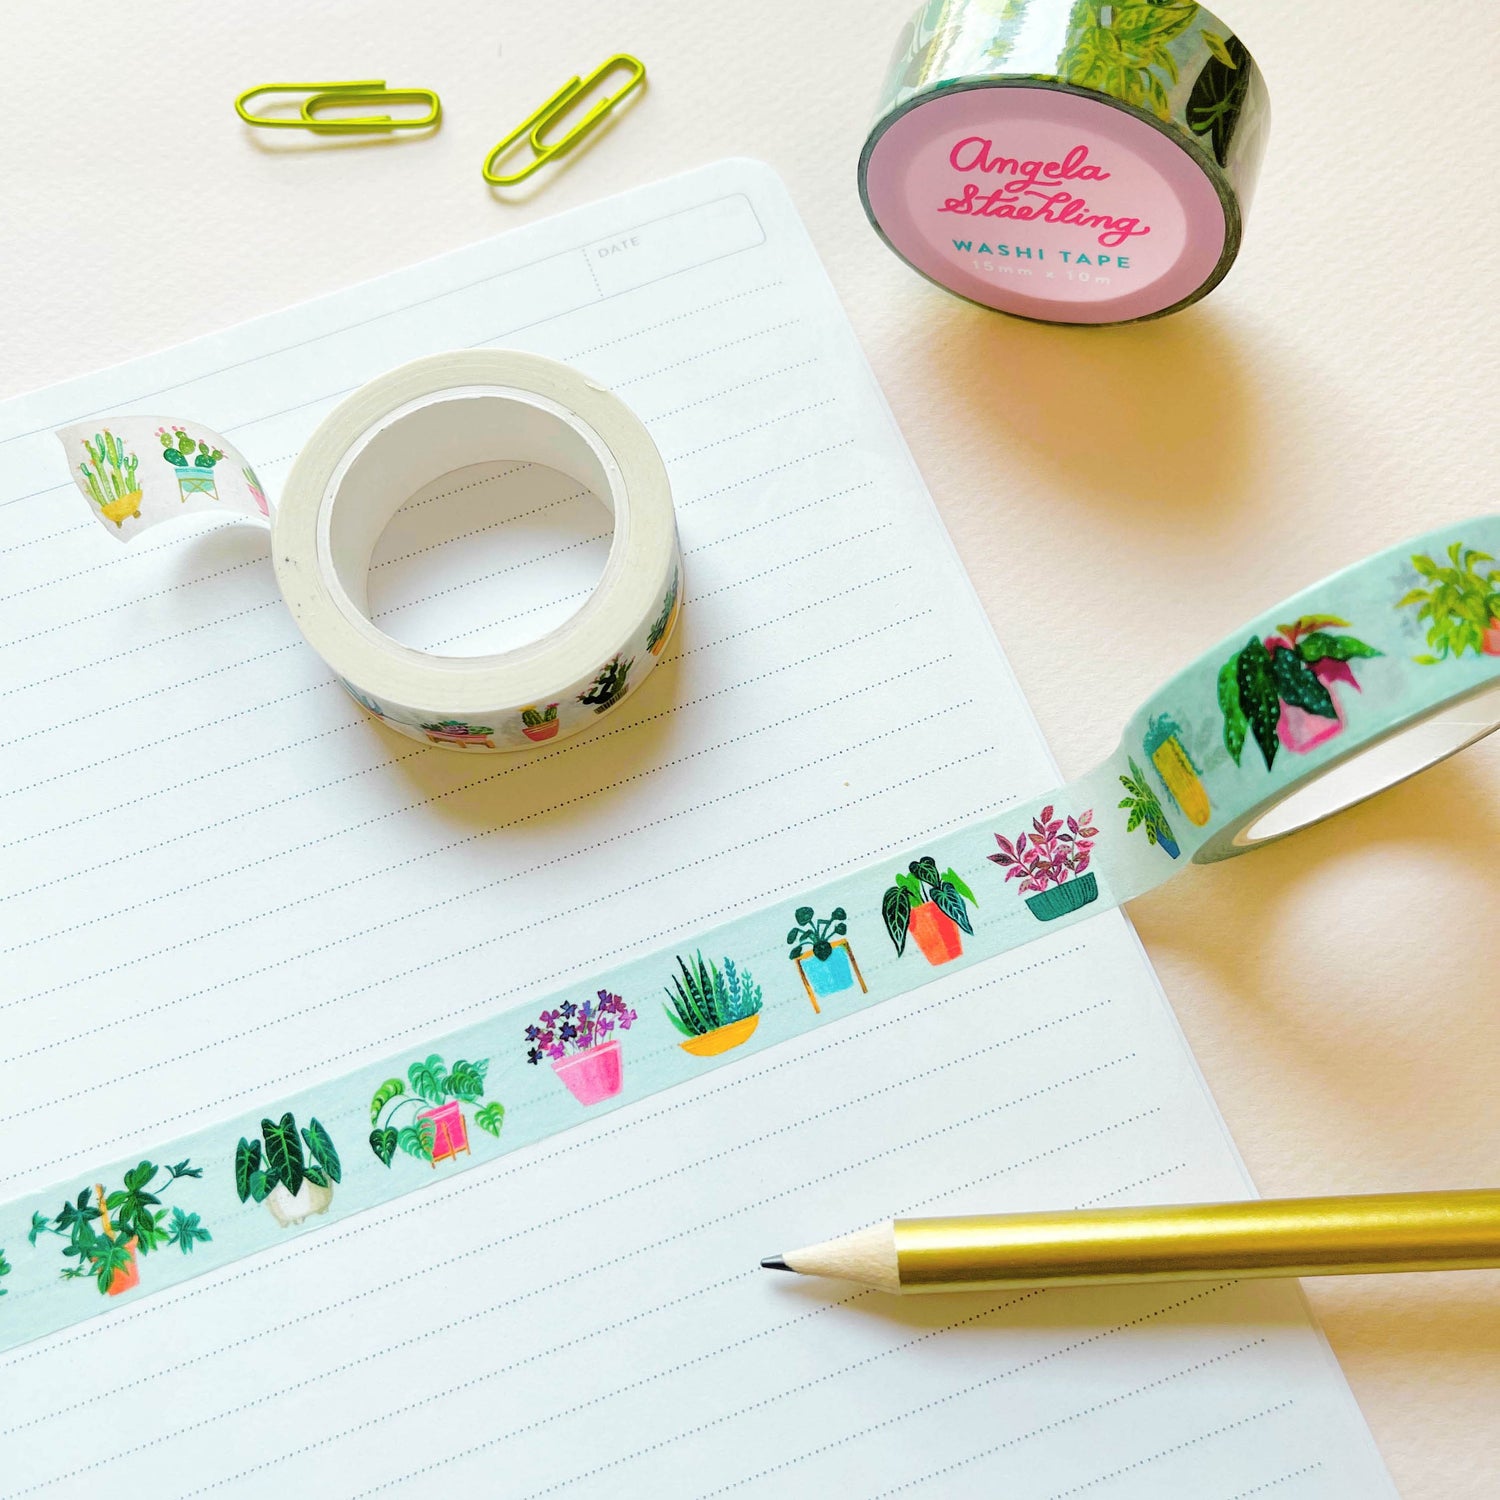 Plant washi tape on notebook with paper clips and pencil